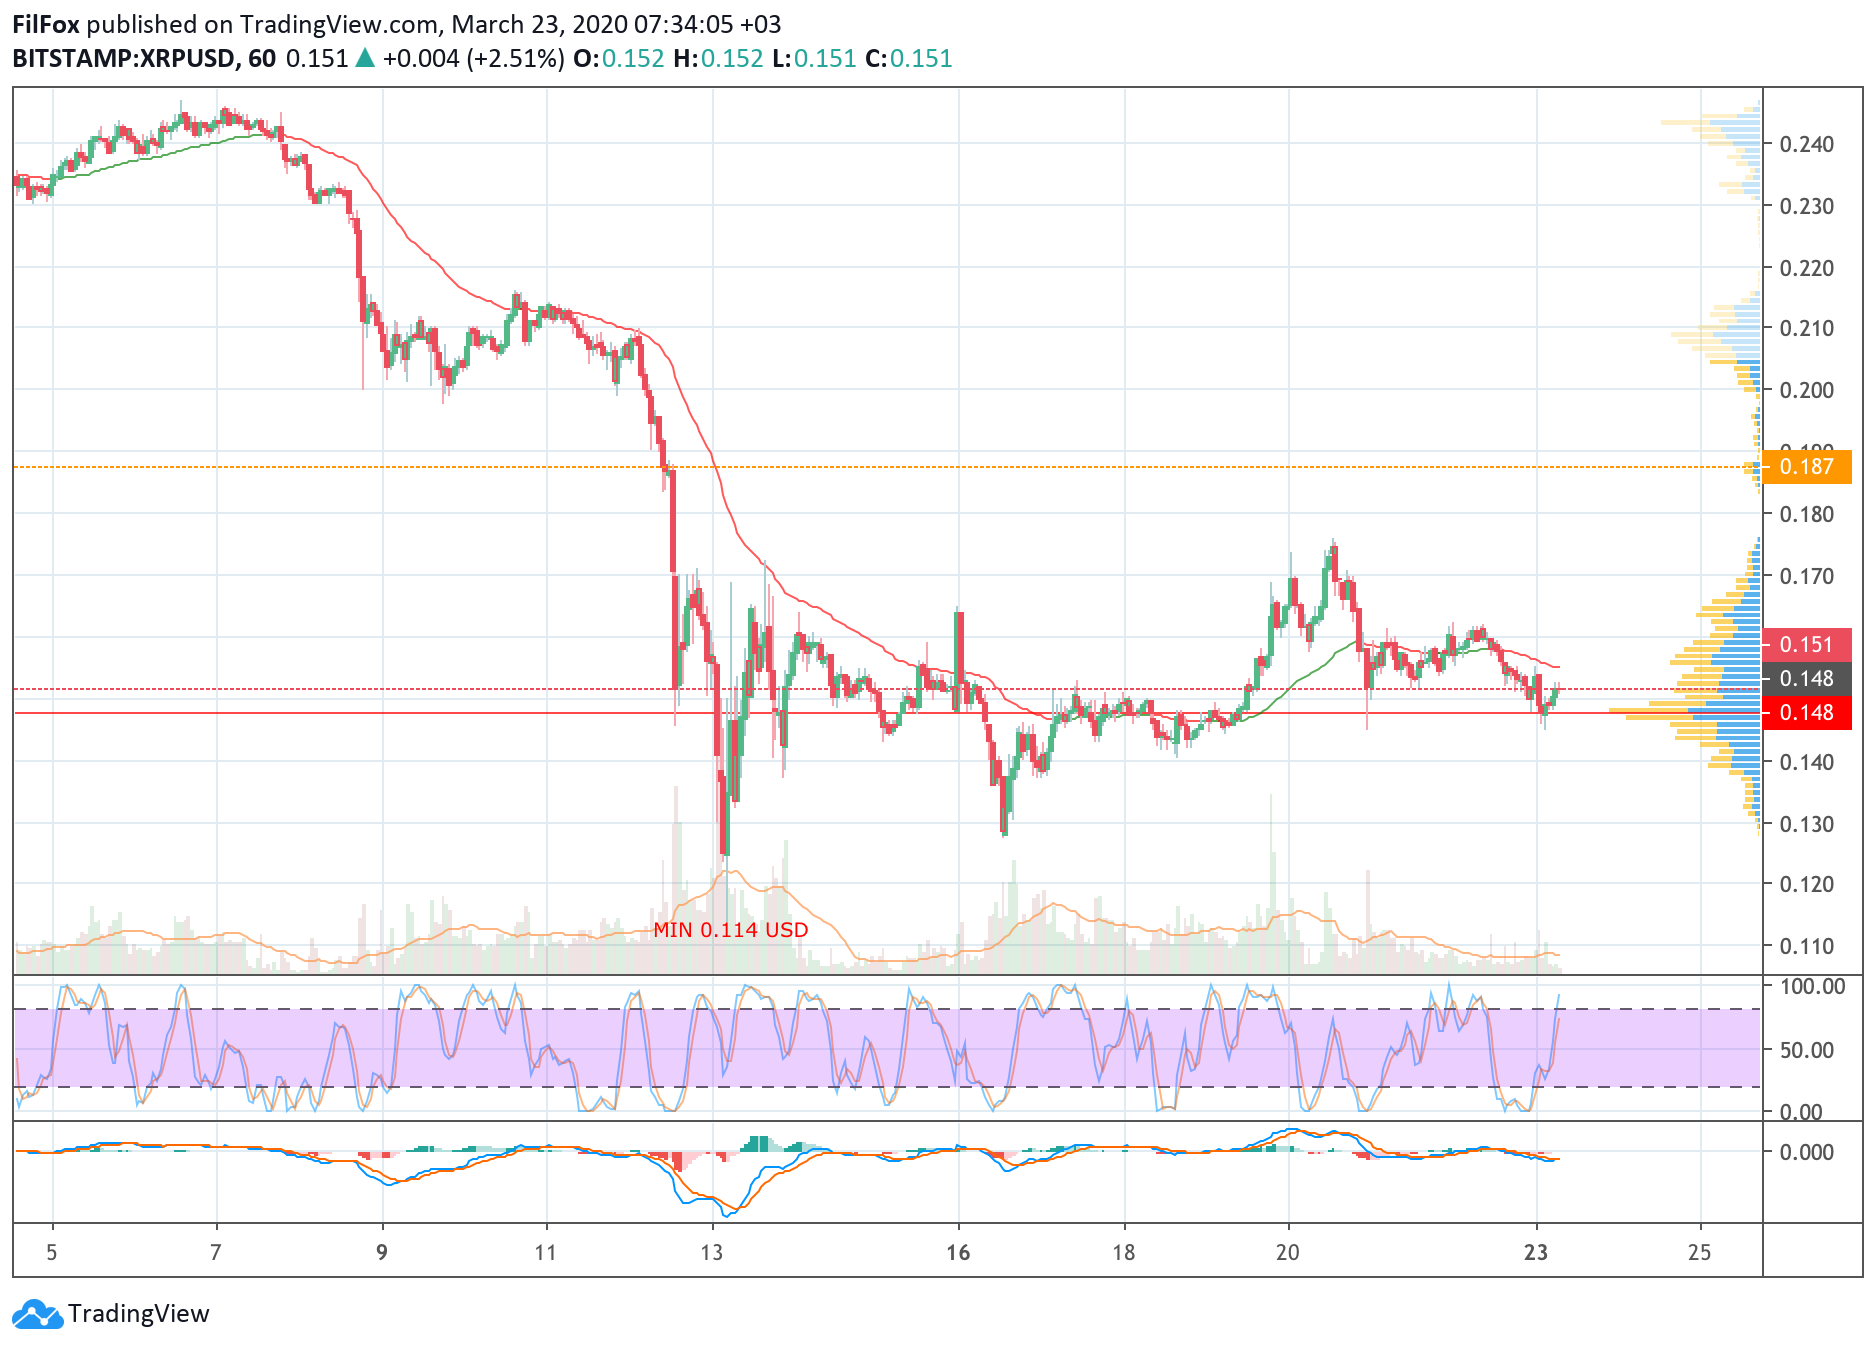 Analysis of cryptocurrency pairs BTC / USD, ETH / USD and XRP / USD on 03/23/2020